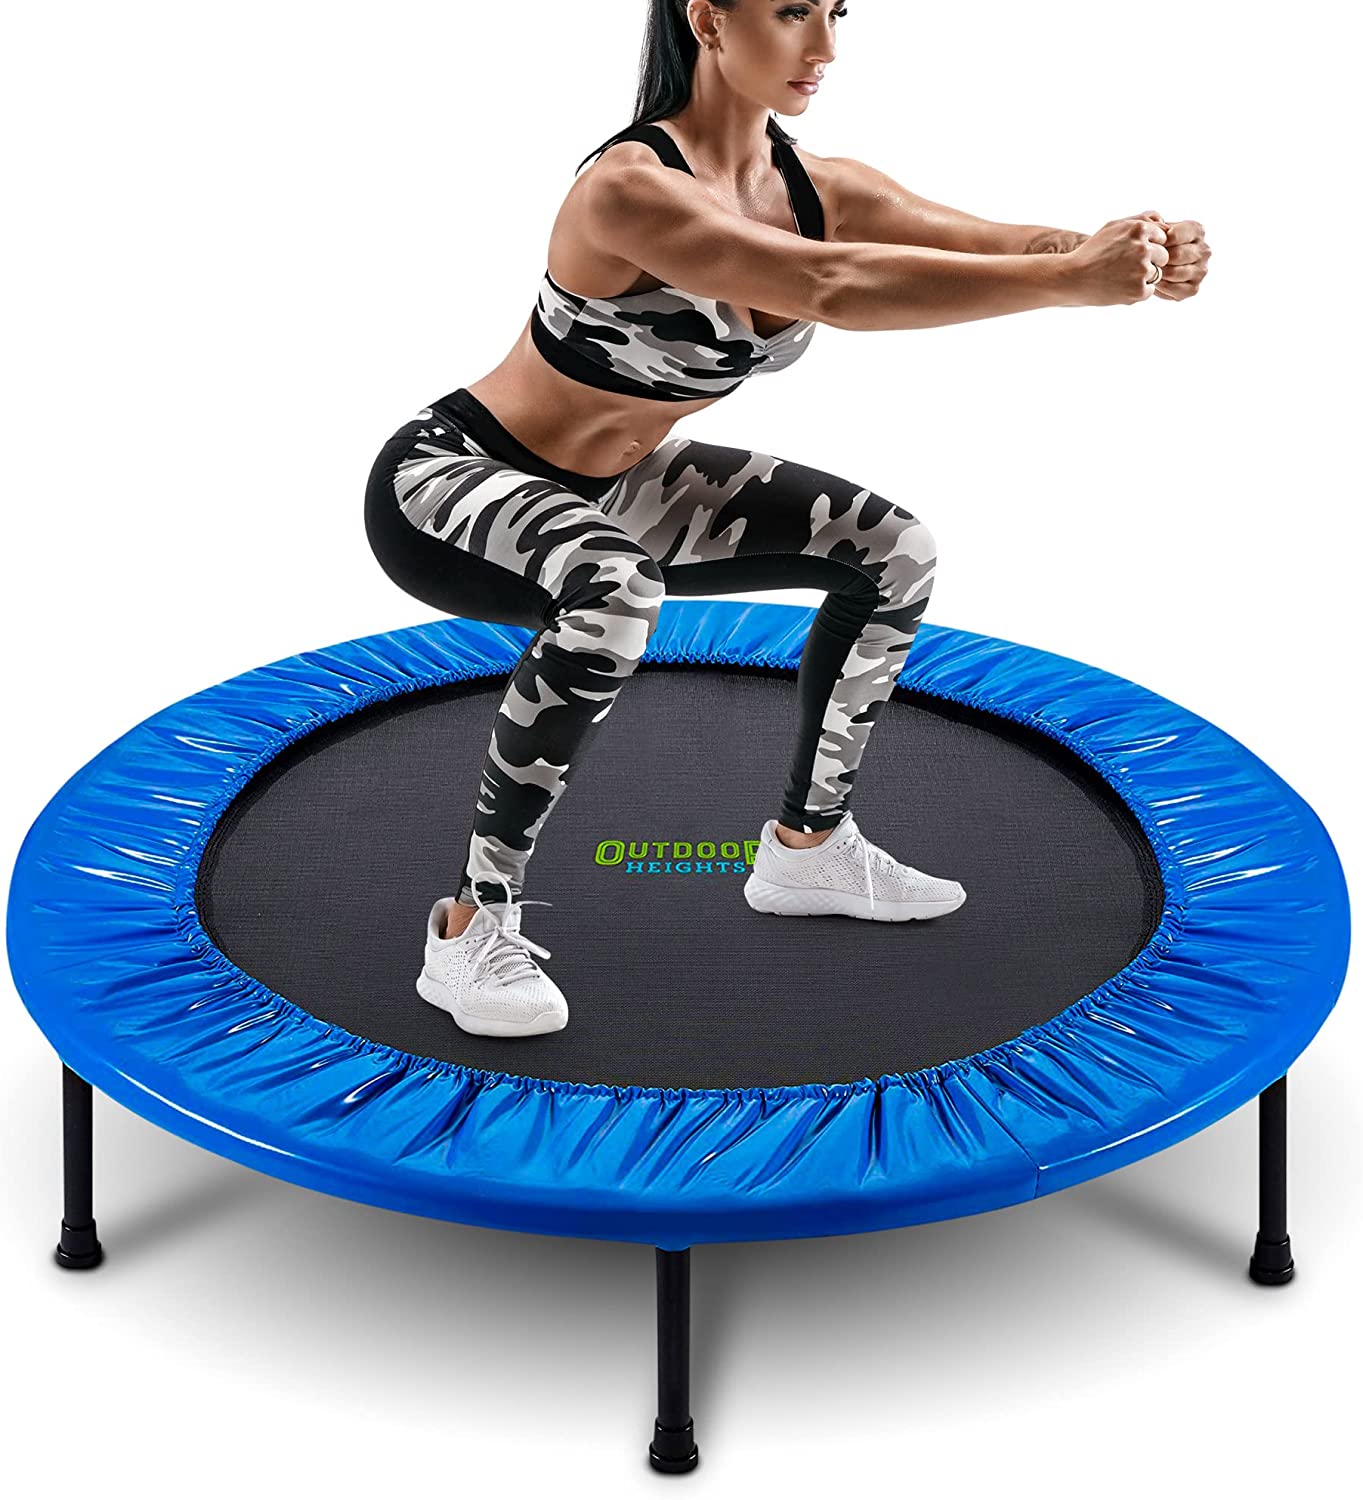 Outdoor Heights Compact Workout Trampoline, 3.6-Feet